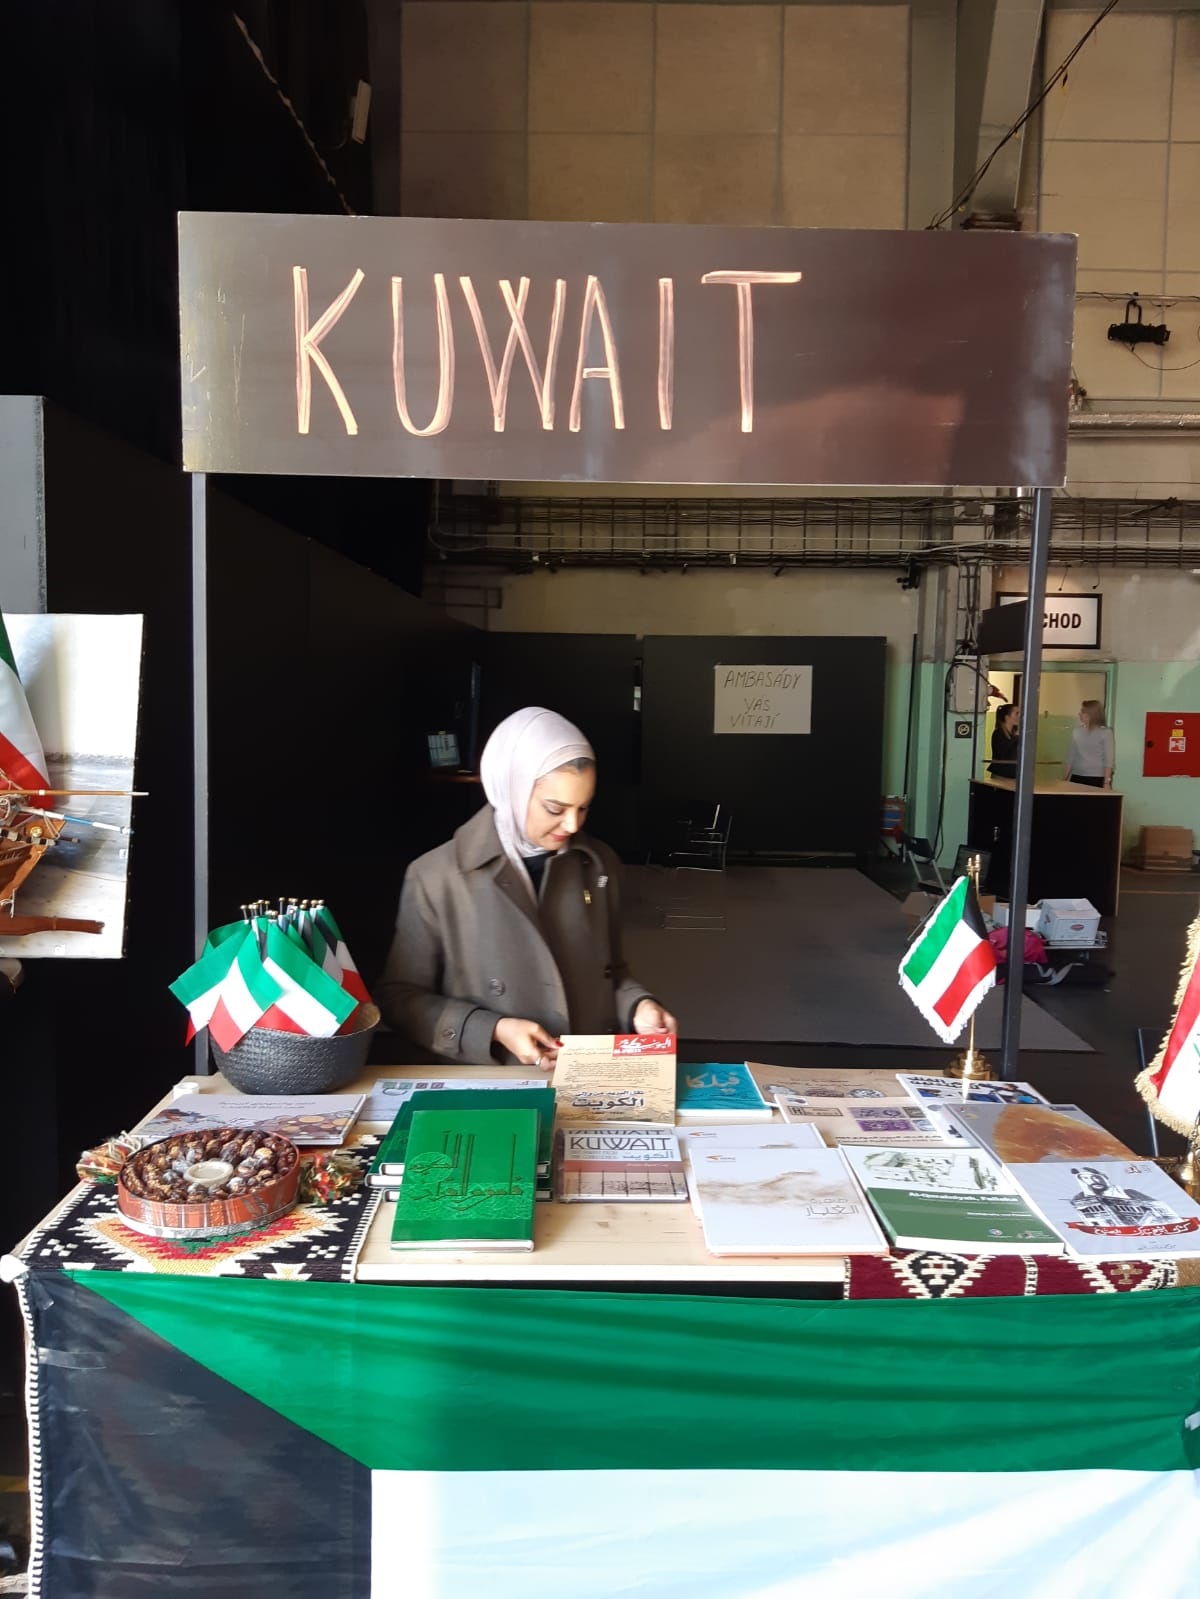 Kuwait's pavilion in the tenth cultural festival